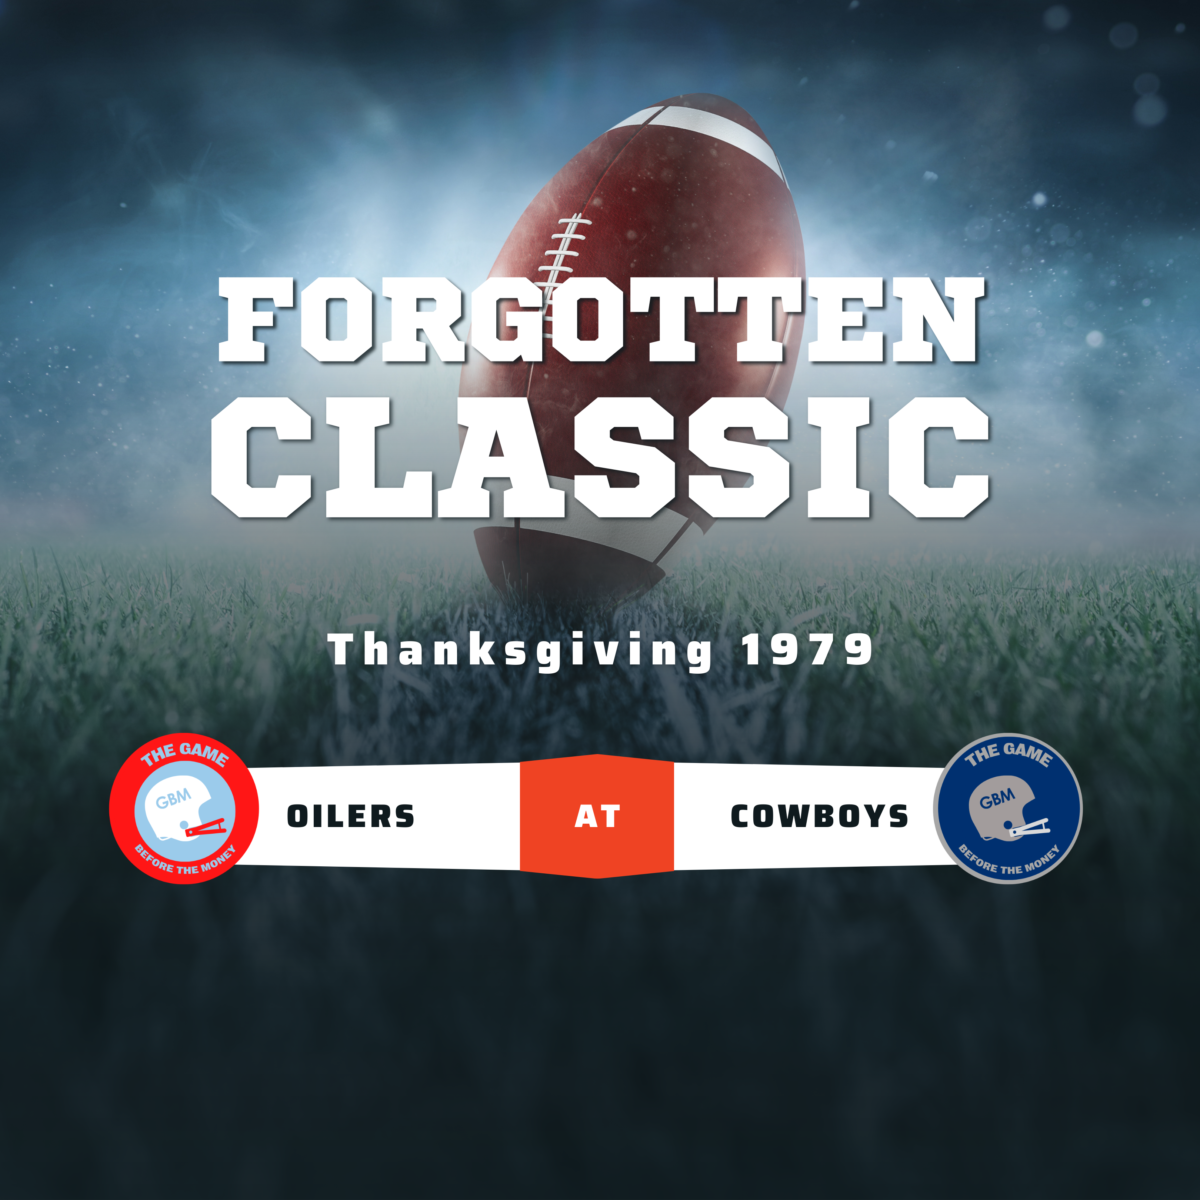 Oilers Cowboys Thanksgiving 1979